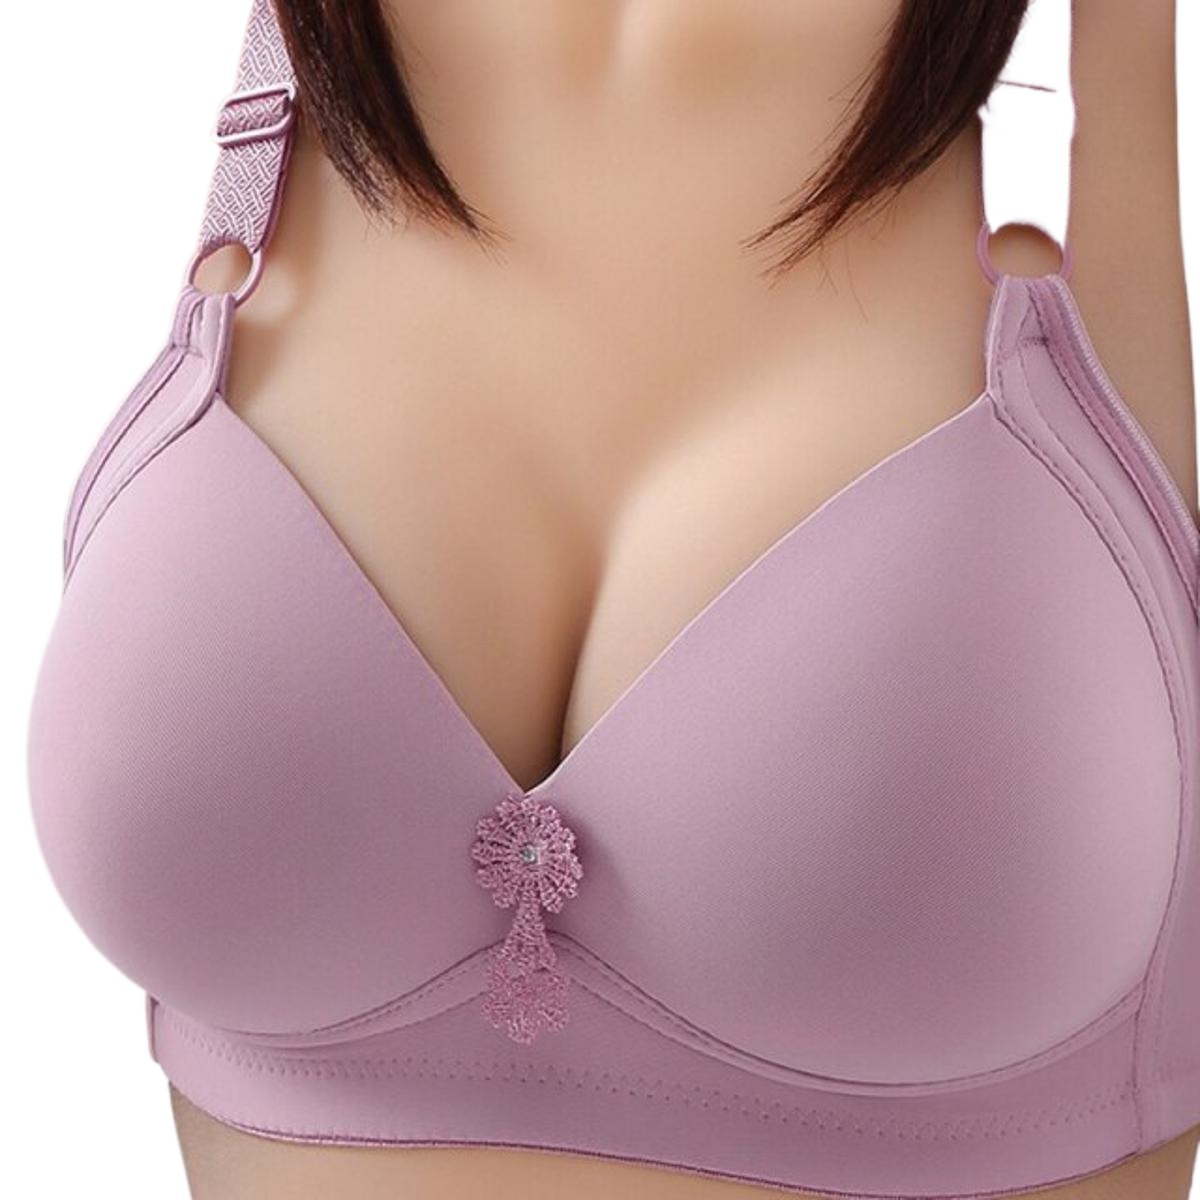 Soft Foam Padded Bras for Girls Best Fits A and B Cups Non Wired Brazier in  Random Colors - No Color Choice